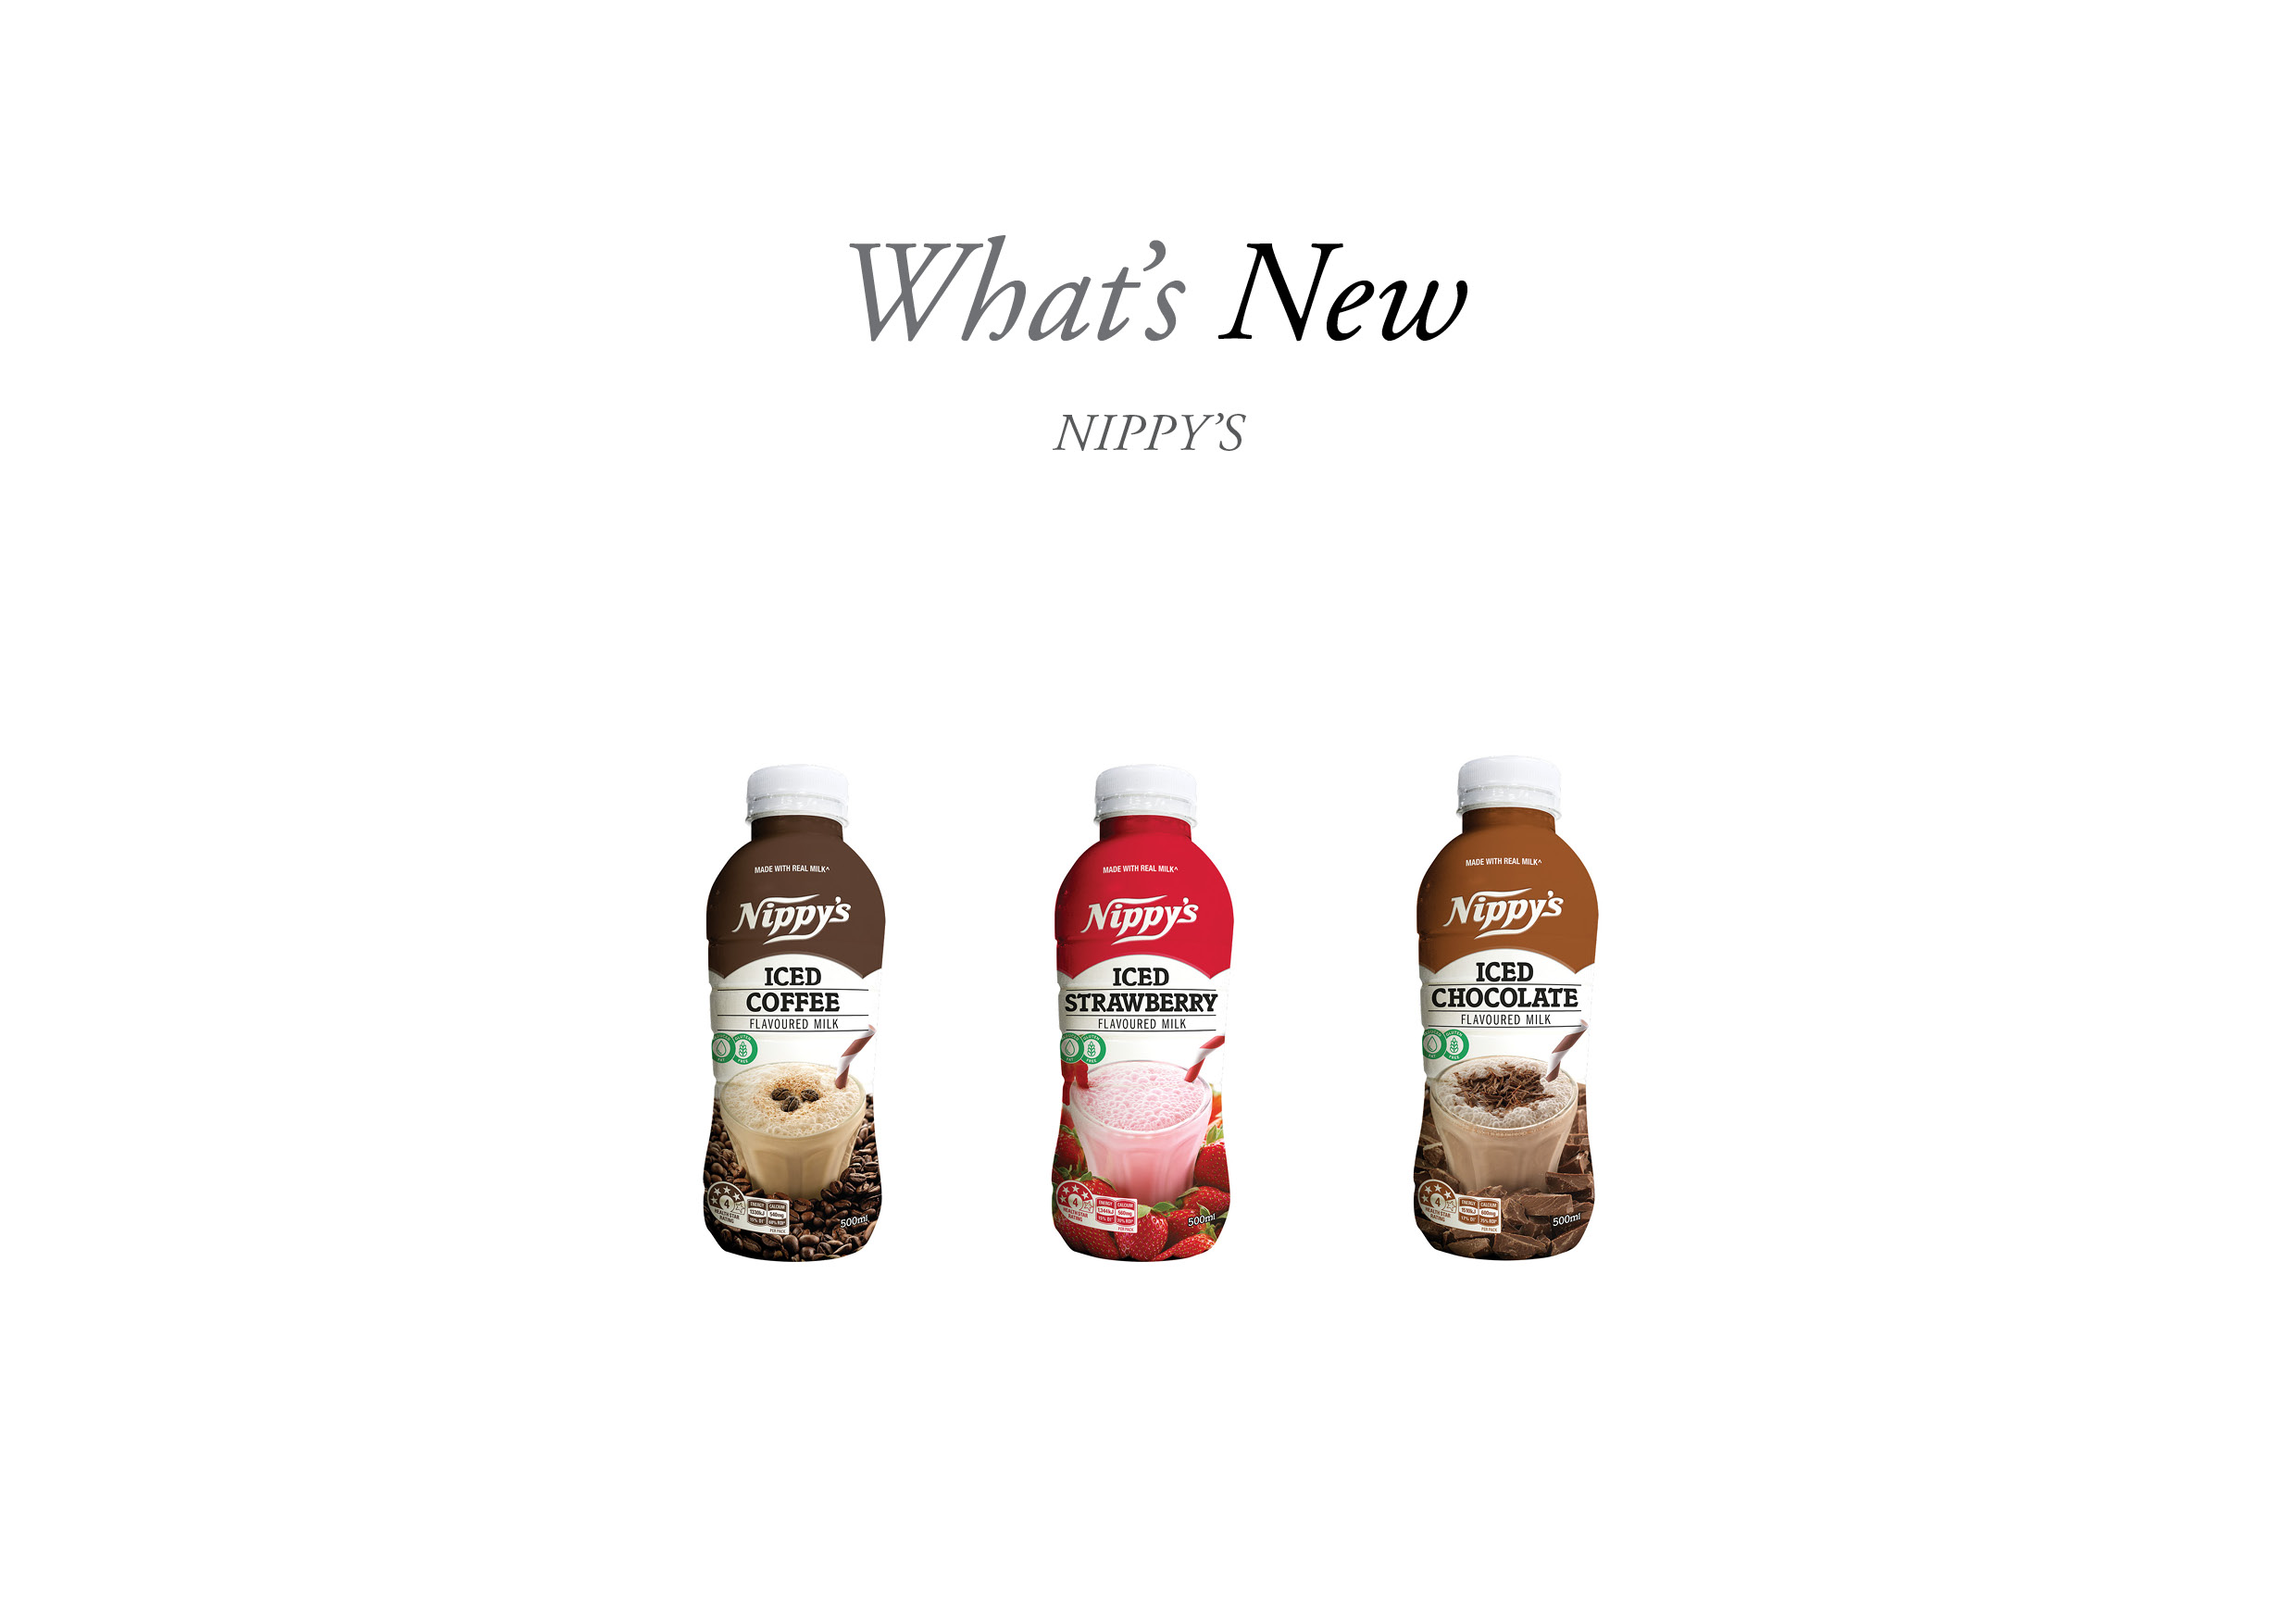 nippy's new PET packaging. 3 bottles: chocolate, coffee, and strawberry flavours